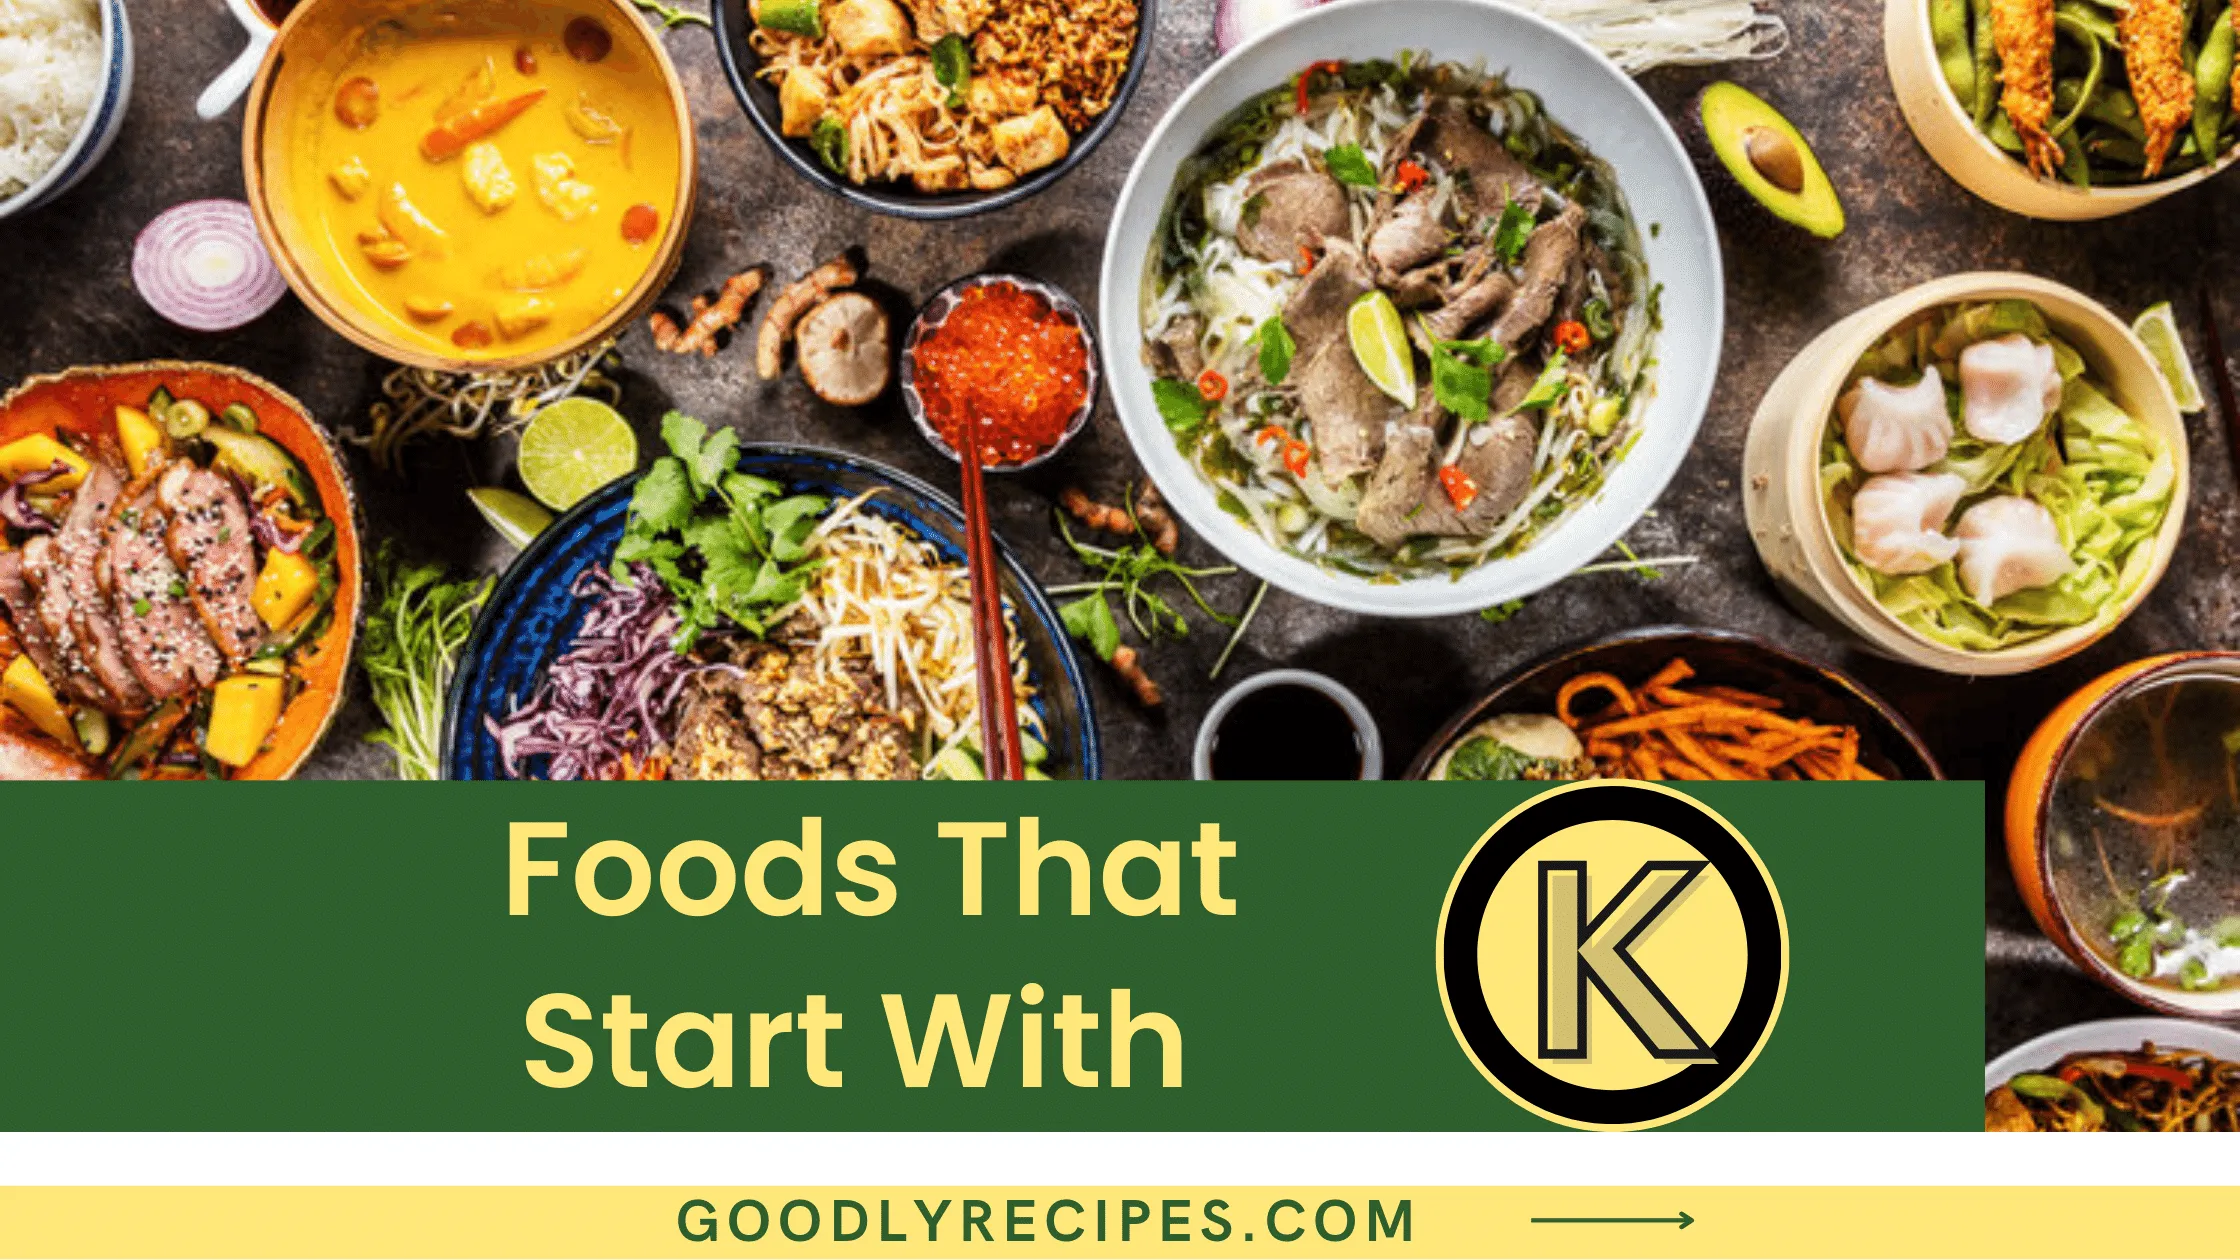 Foods That Start With K - Special Dishes